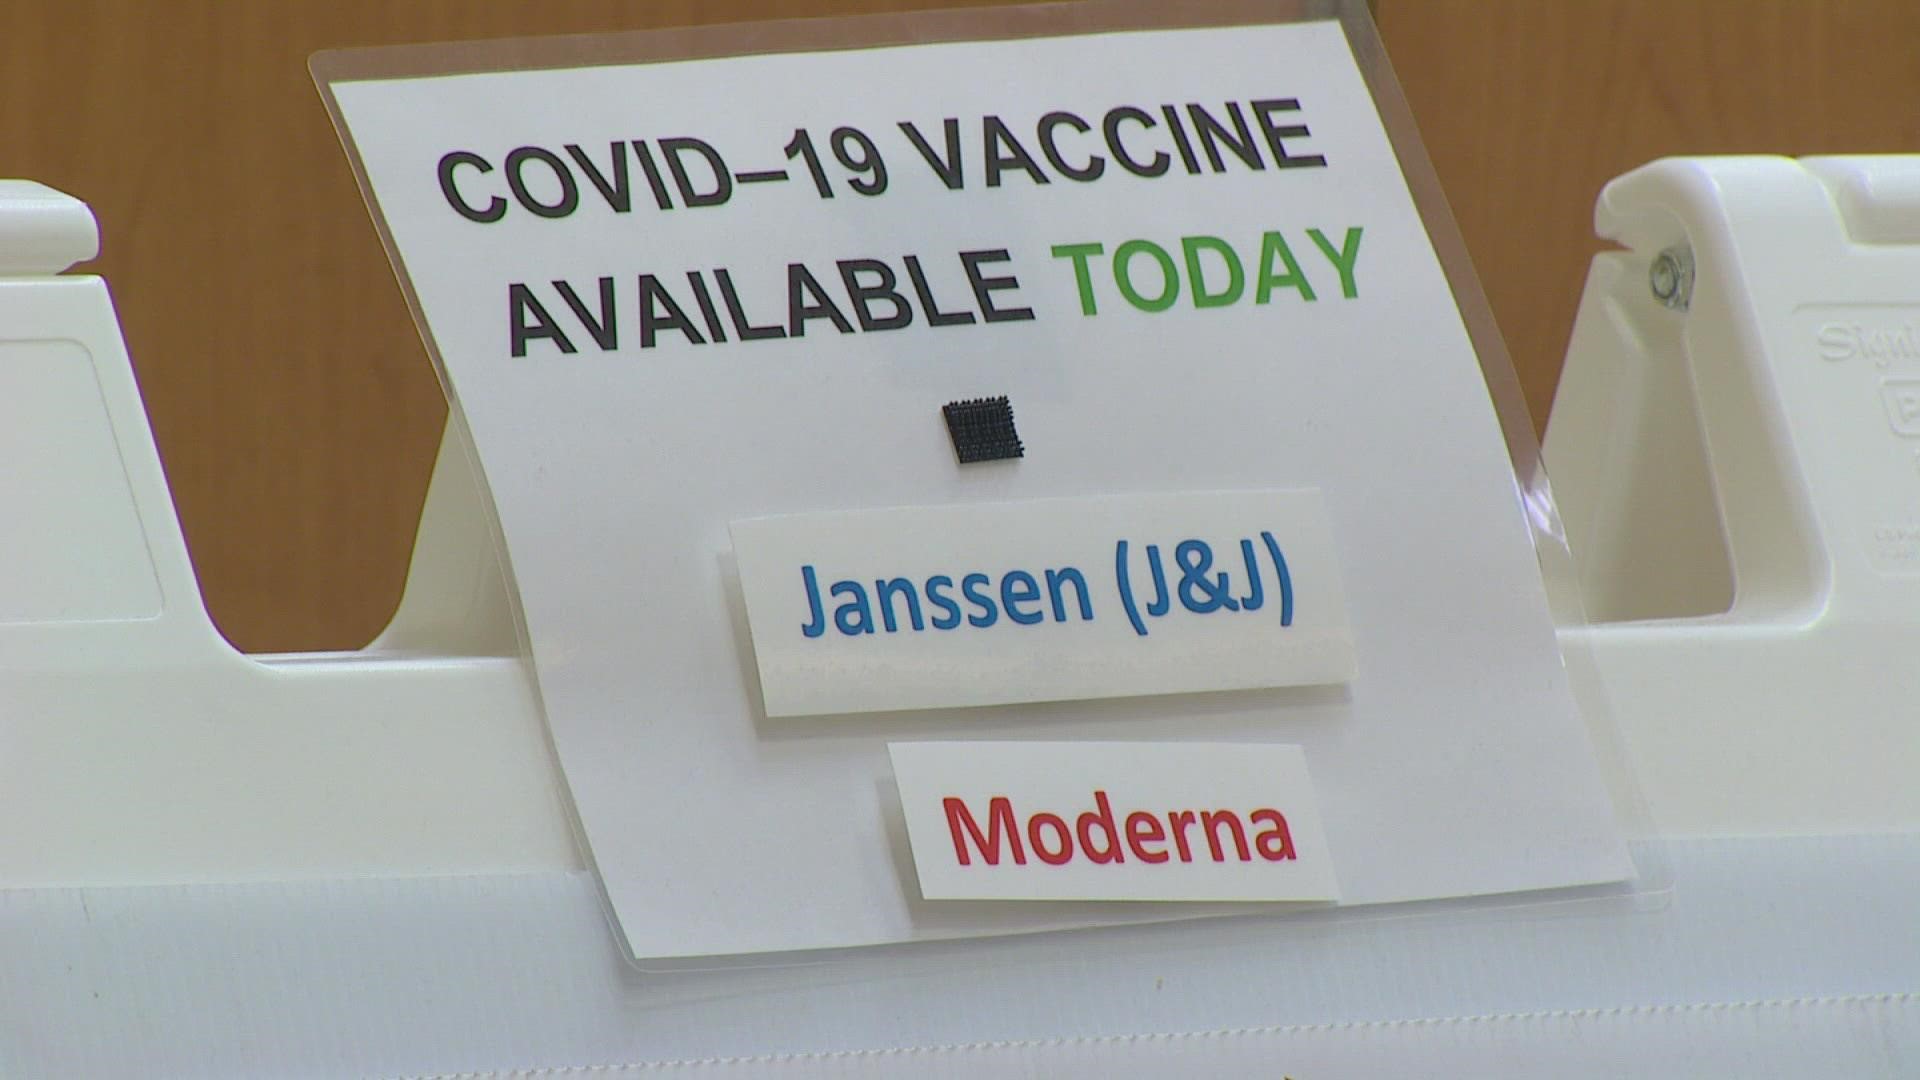 Vaccine rates for this week were 21% higher than the week before and 34% higher compared to two weeks ago, according to DOH data.